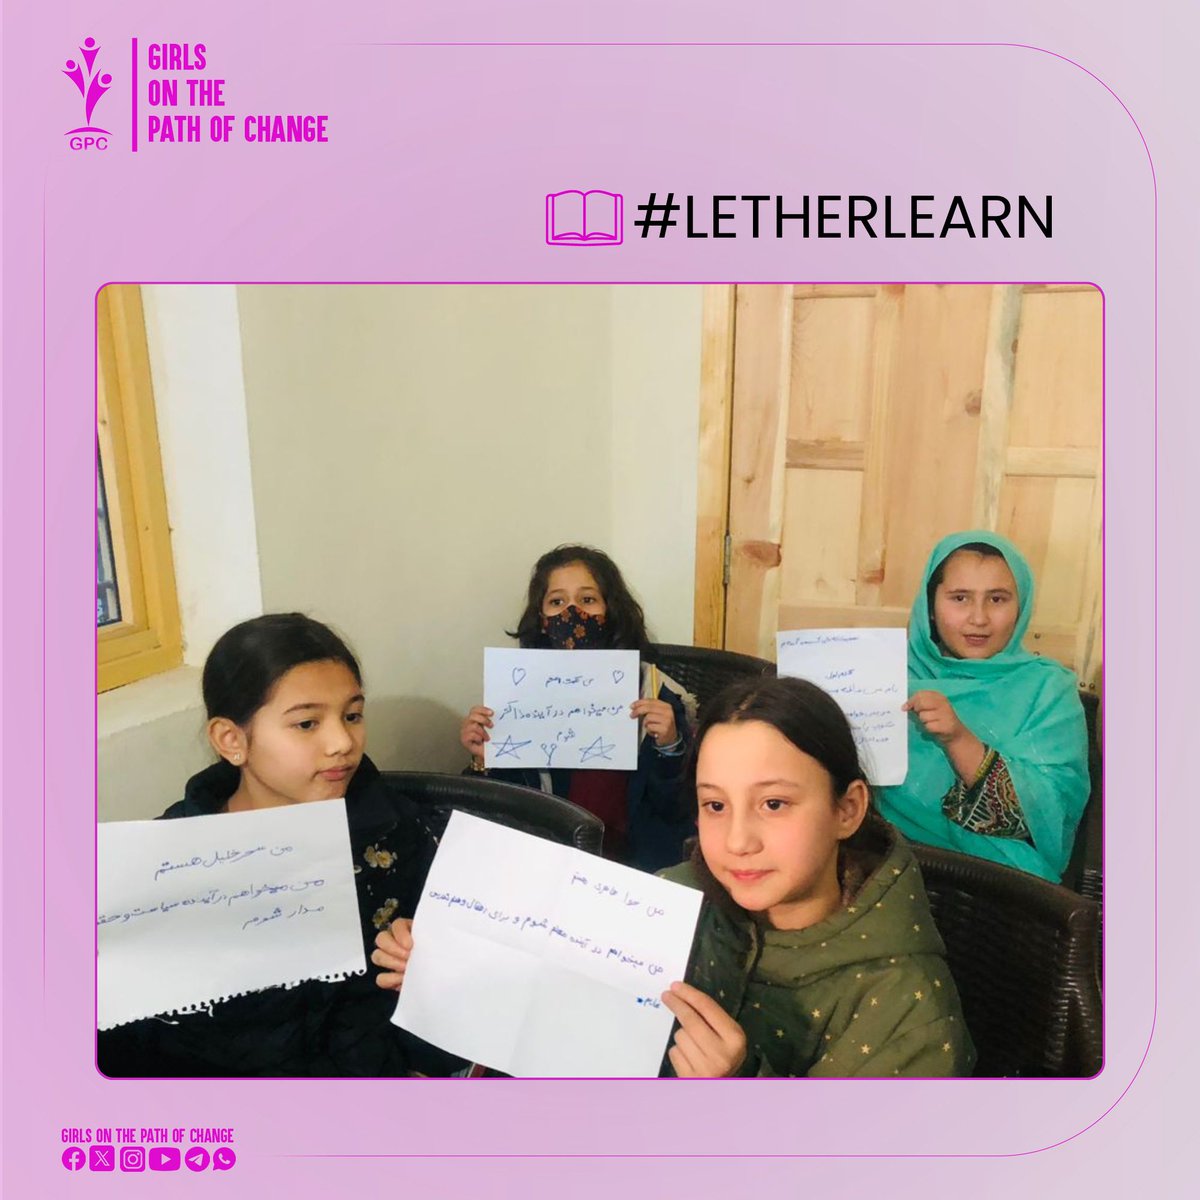 By supporting education initiatives and advocating for their rights, we empower Afghan girls to work toward their goals.

Let’s work together to make sure all girls in Afghanistan can go to school and build a better future for themselves and their country. #LetAfghanGirlsLearn